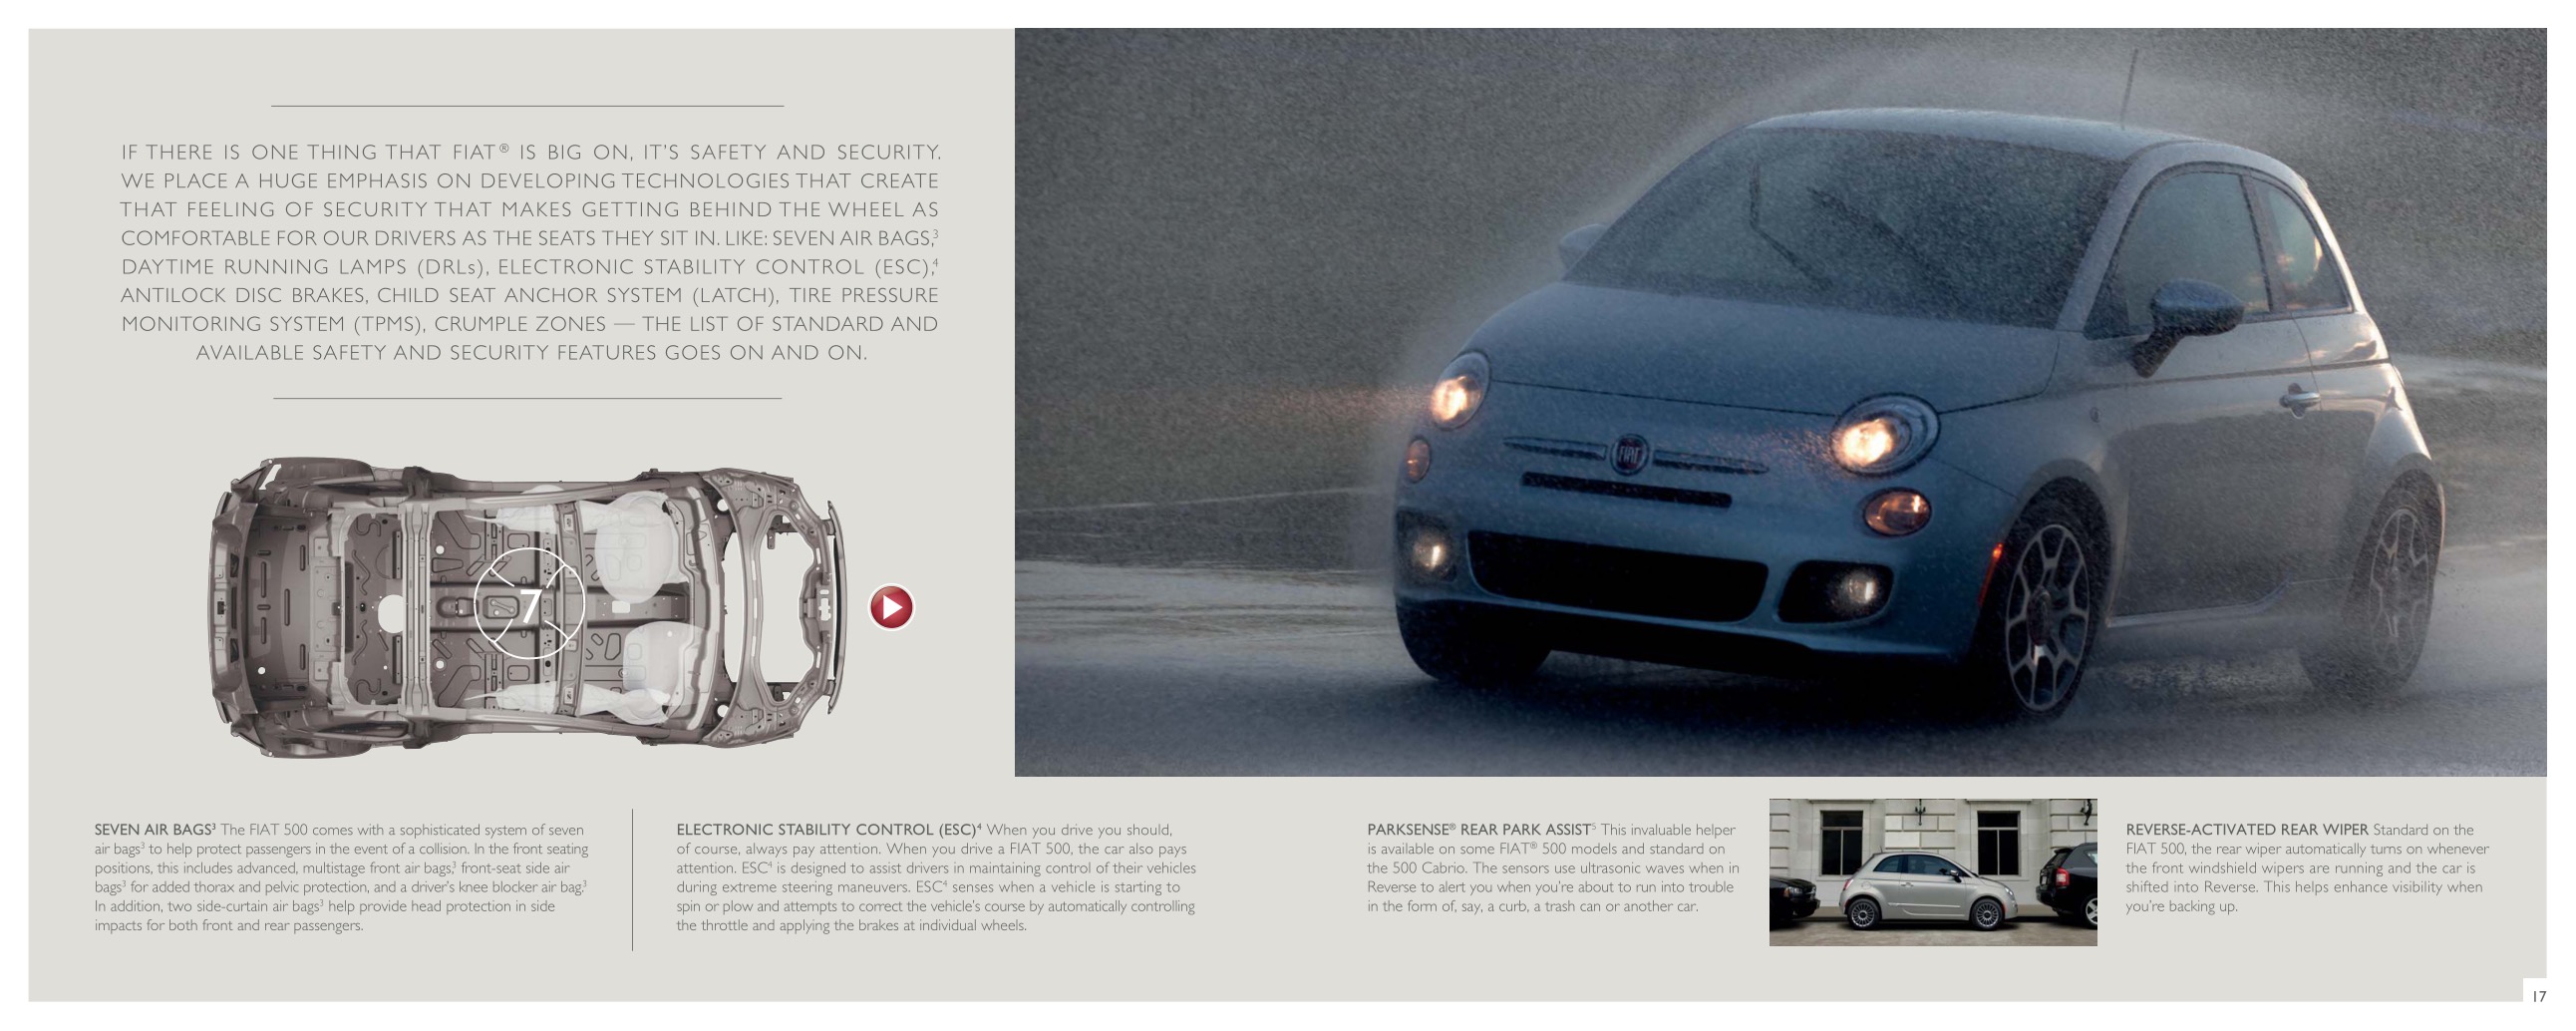 2015 Fiat Full-Line Brochure Page 36